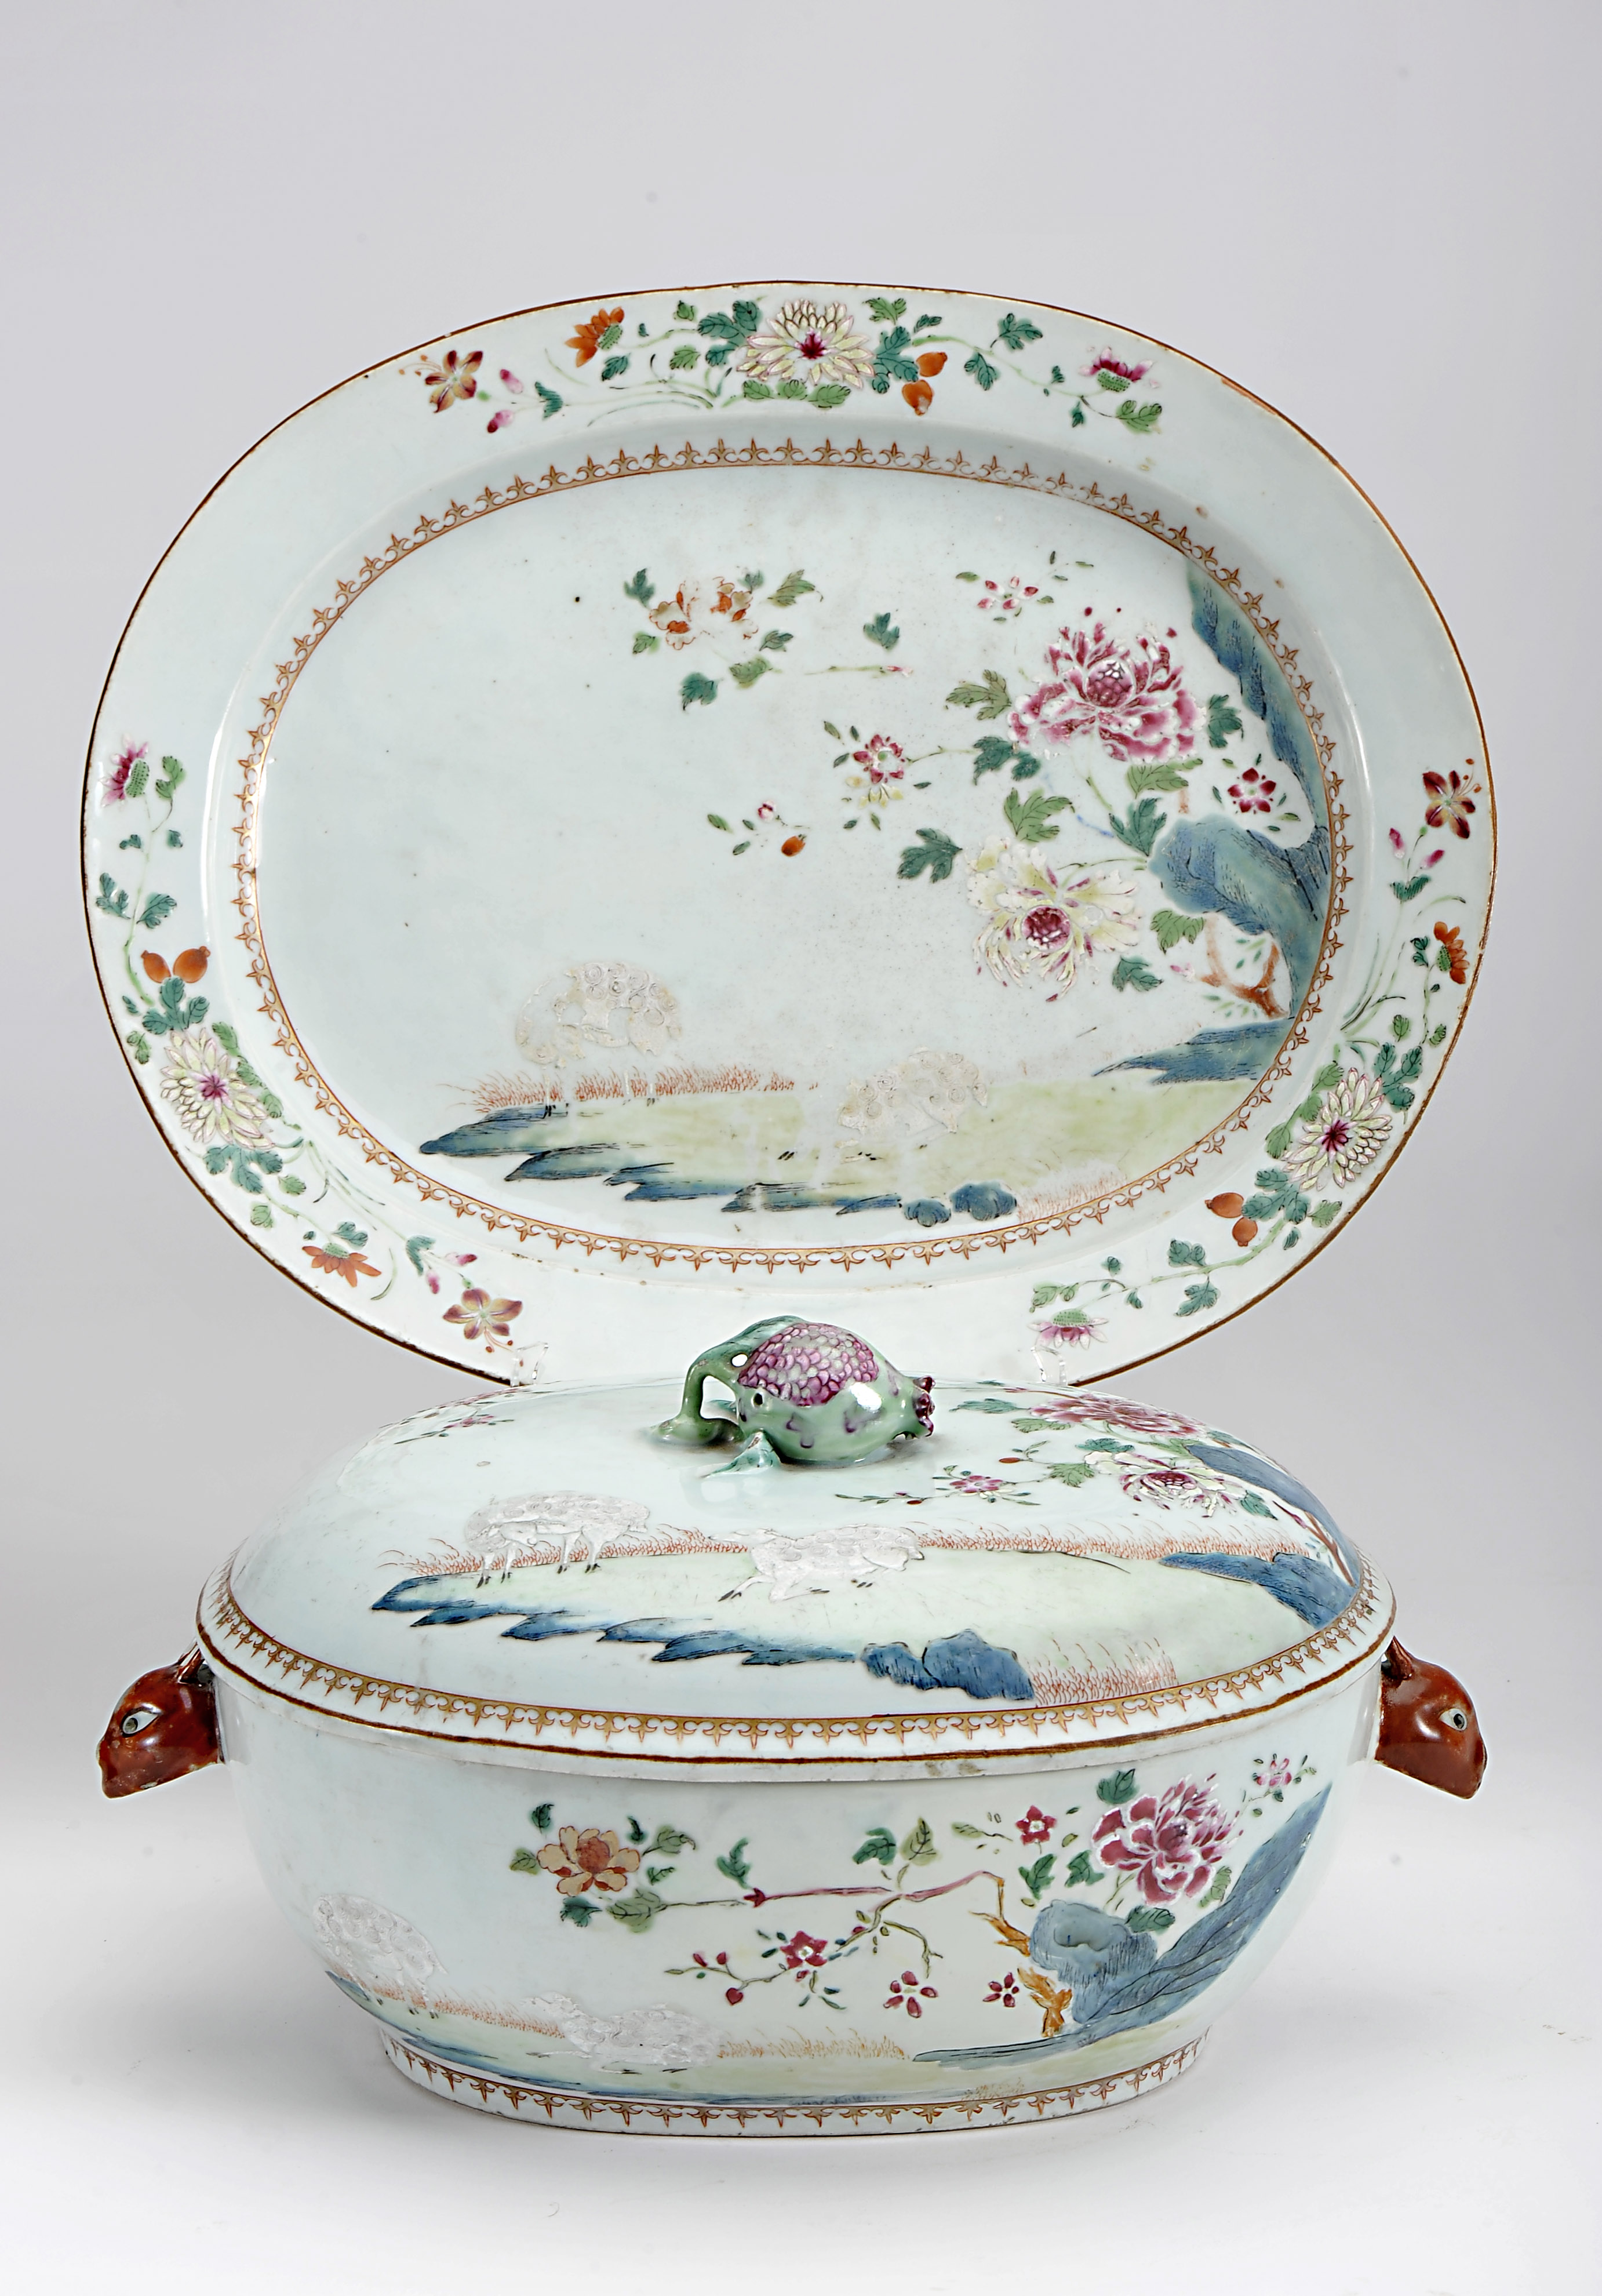 A large oval tureen with stand - Image 2 of 2